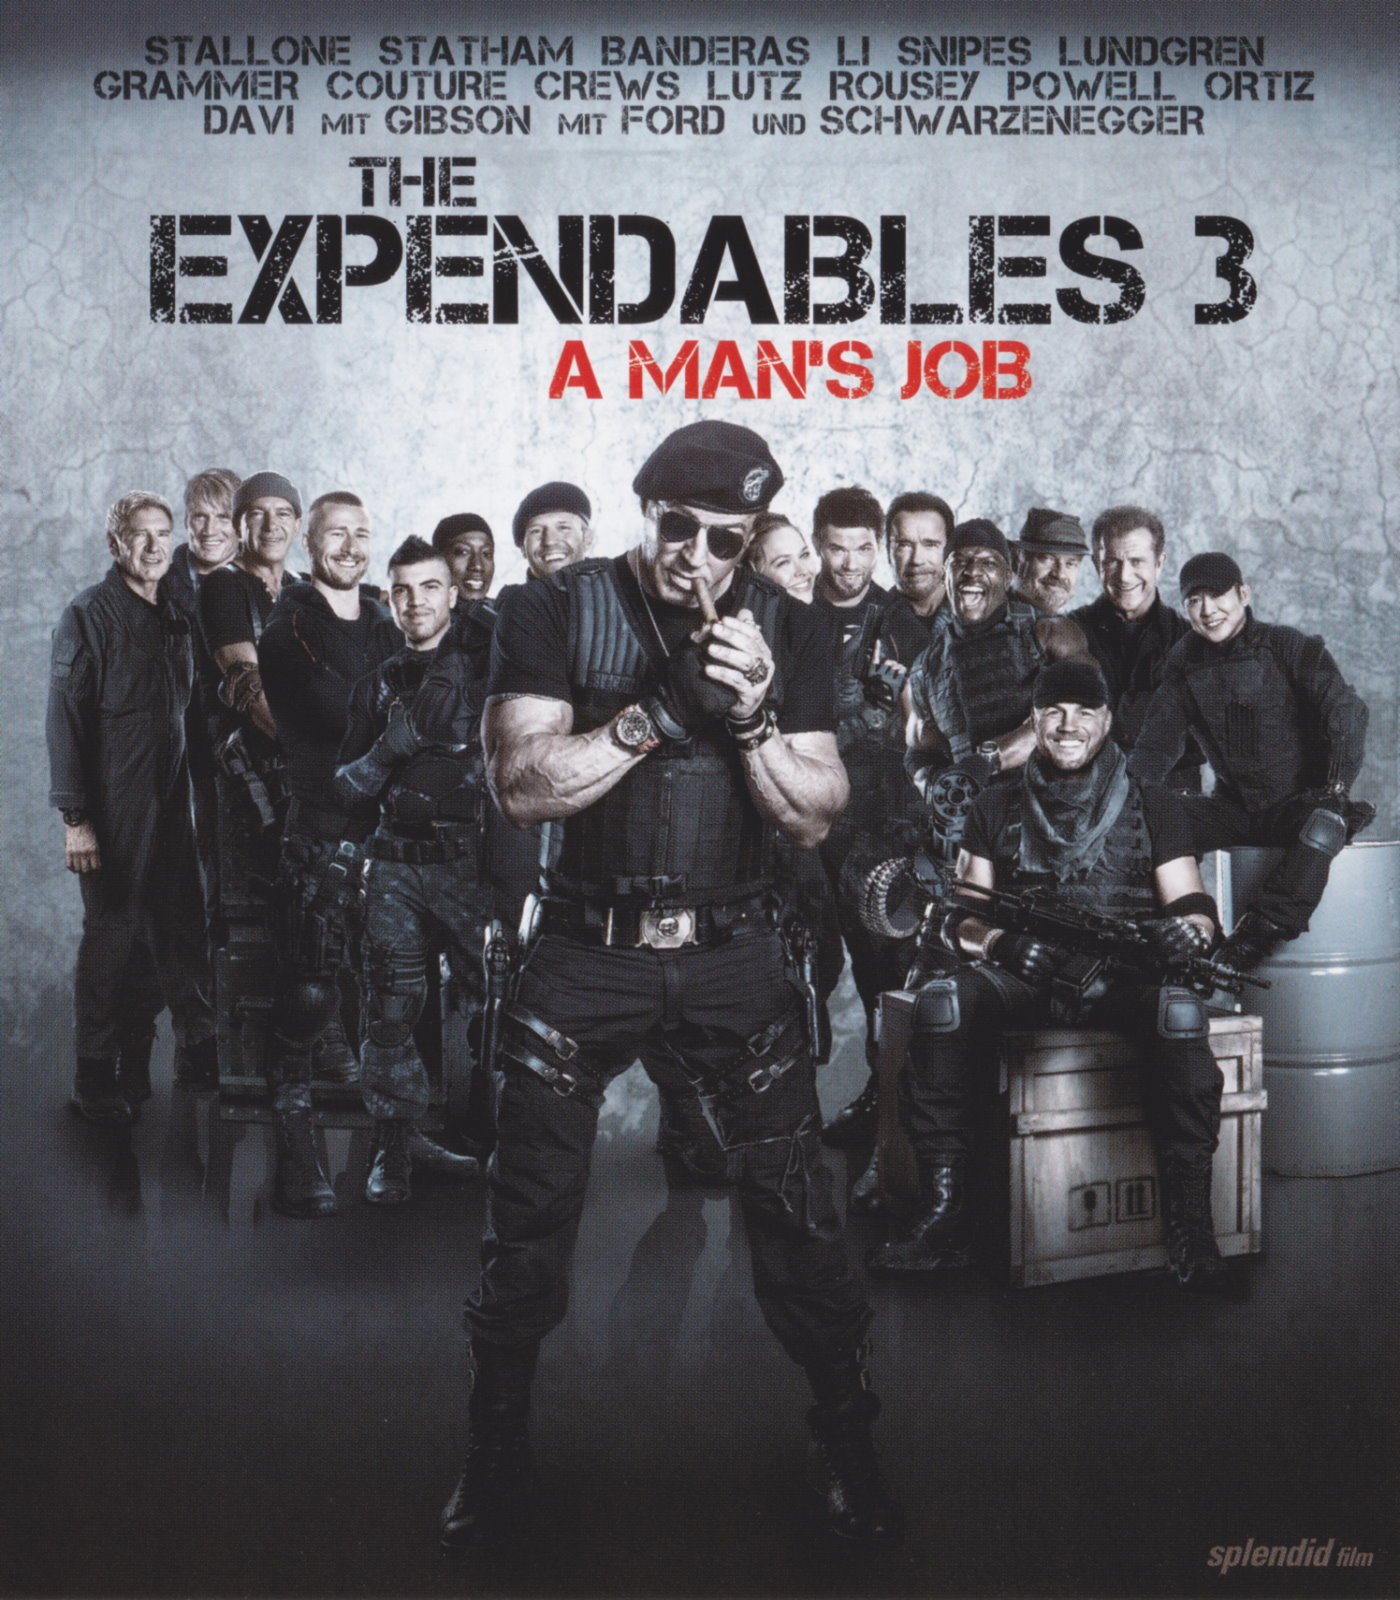 Cover - The Expendables 3 - A Man's Job.jpg